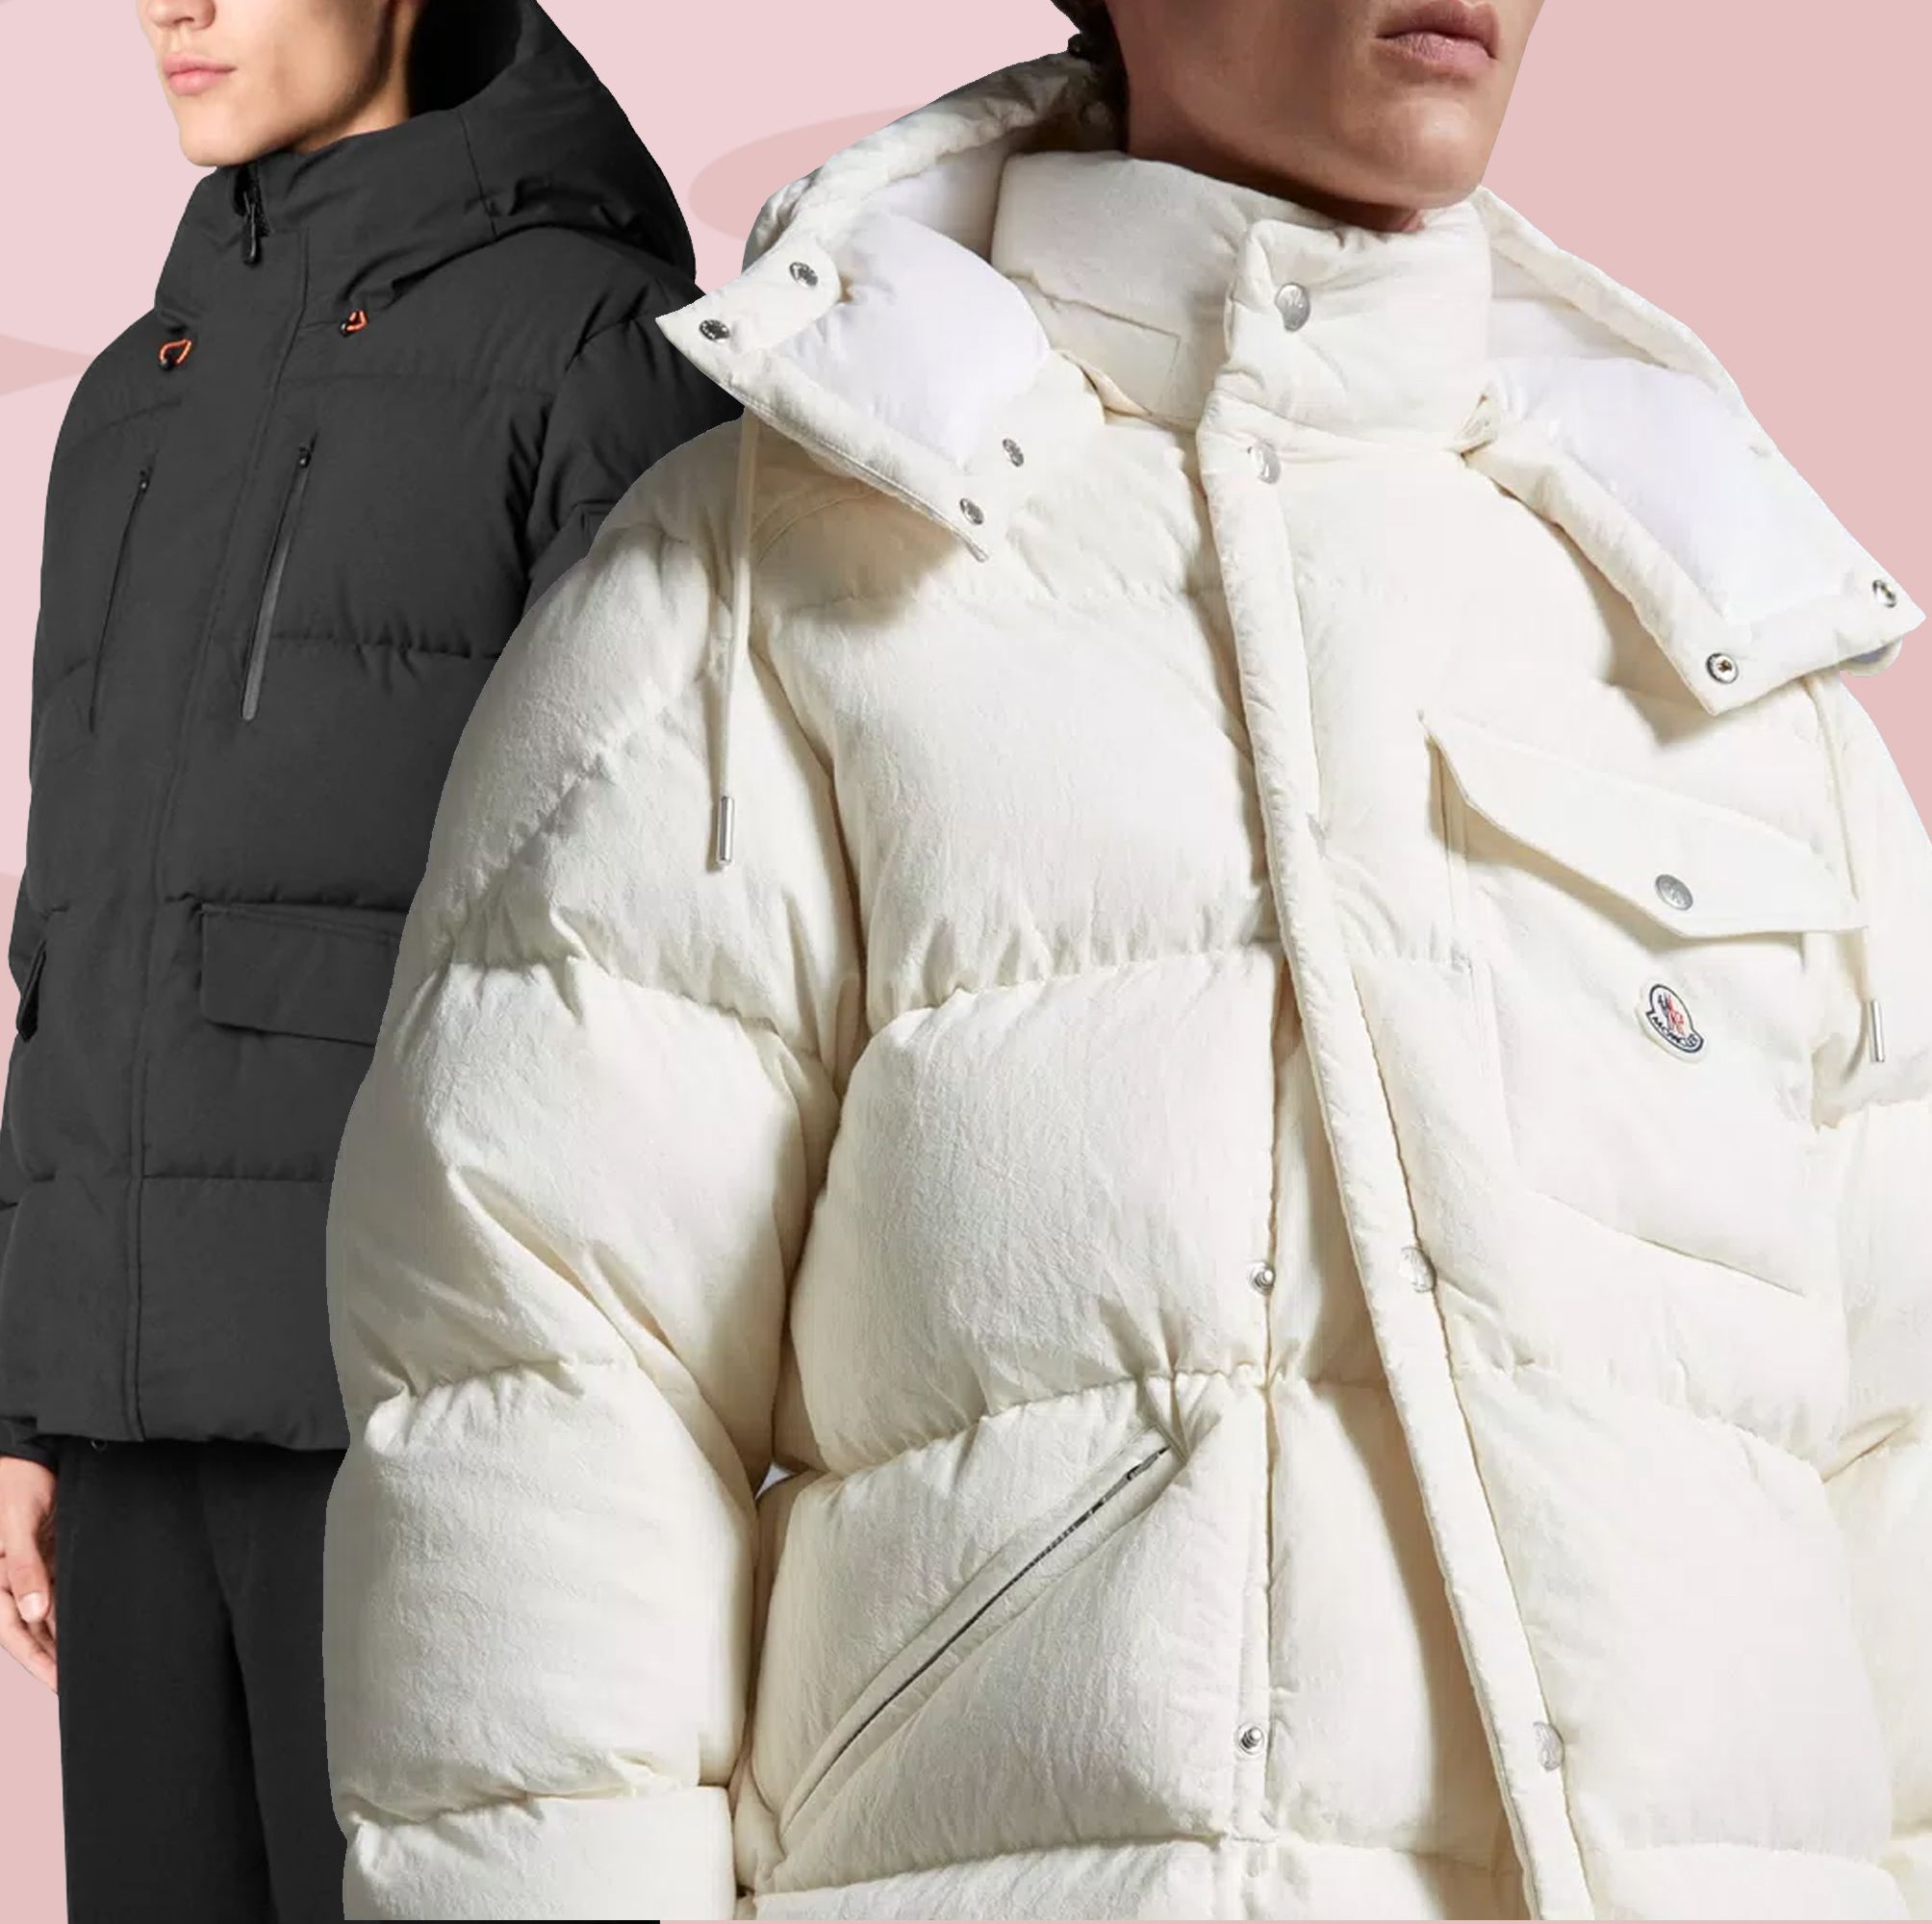 You Need a Good Winter Coat. Here Are 28 of the Best.